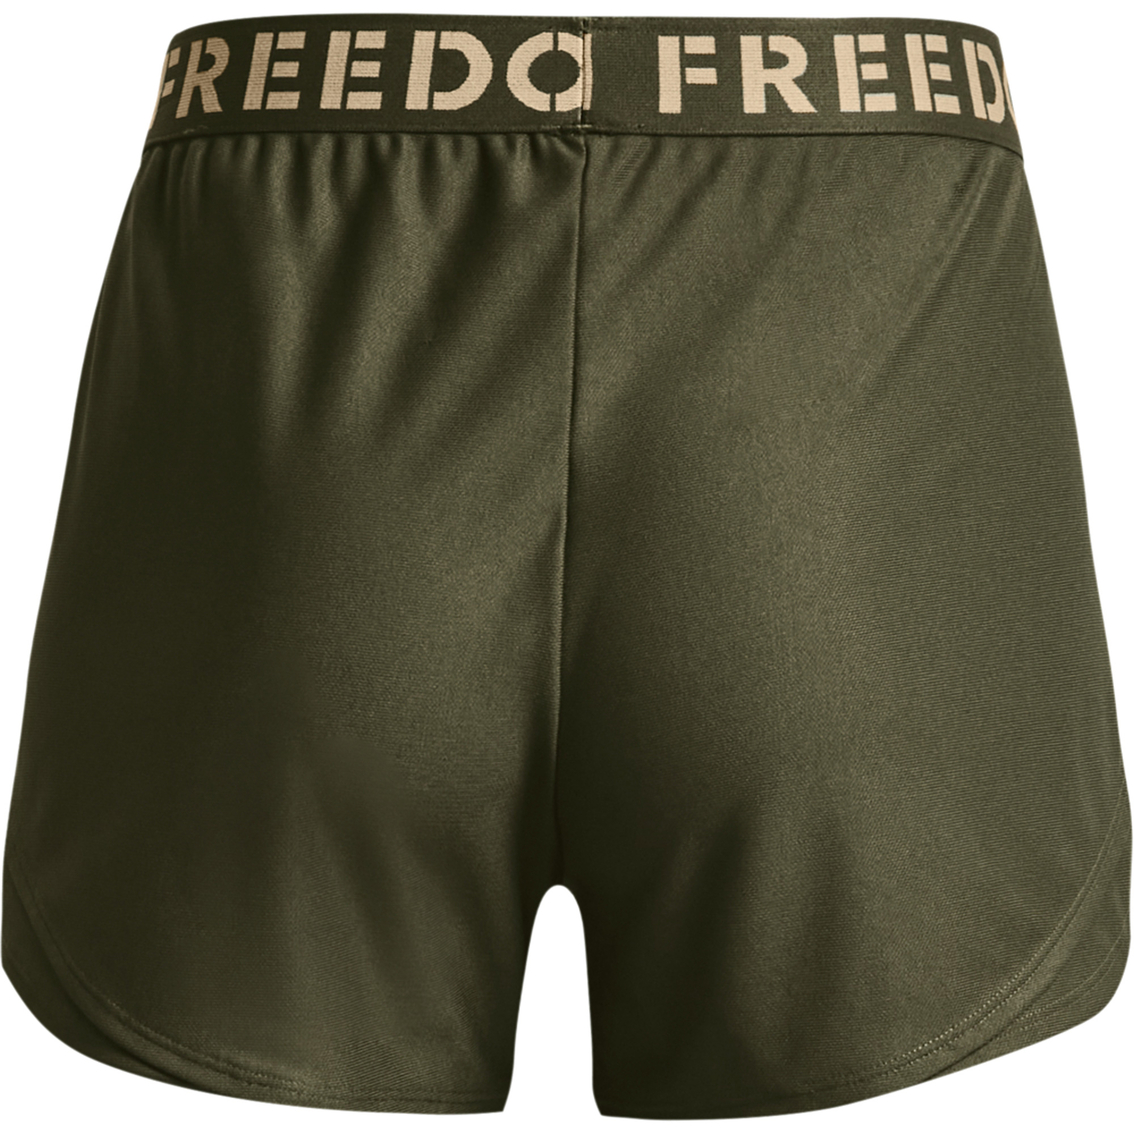 Under Armour Freedom Play Up Shorts - Image 5 of 6